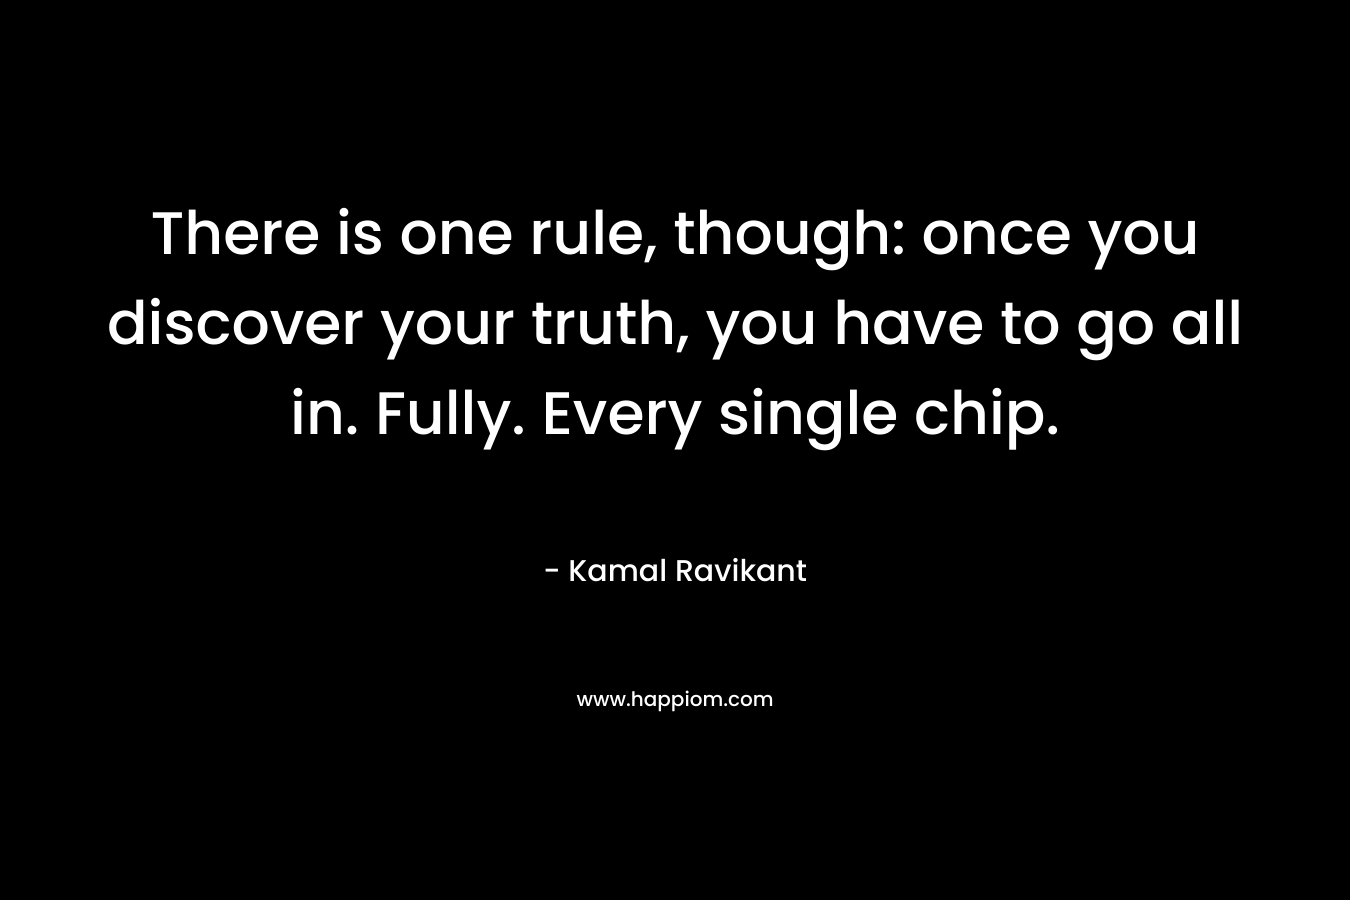 There is one rule, though: once you discover your truth, you have to go all in. Fully. Every single chip. – Kamal Ravikant